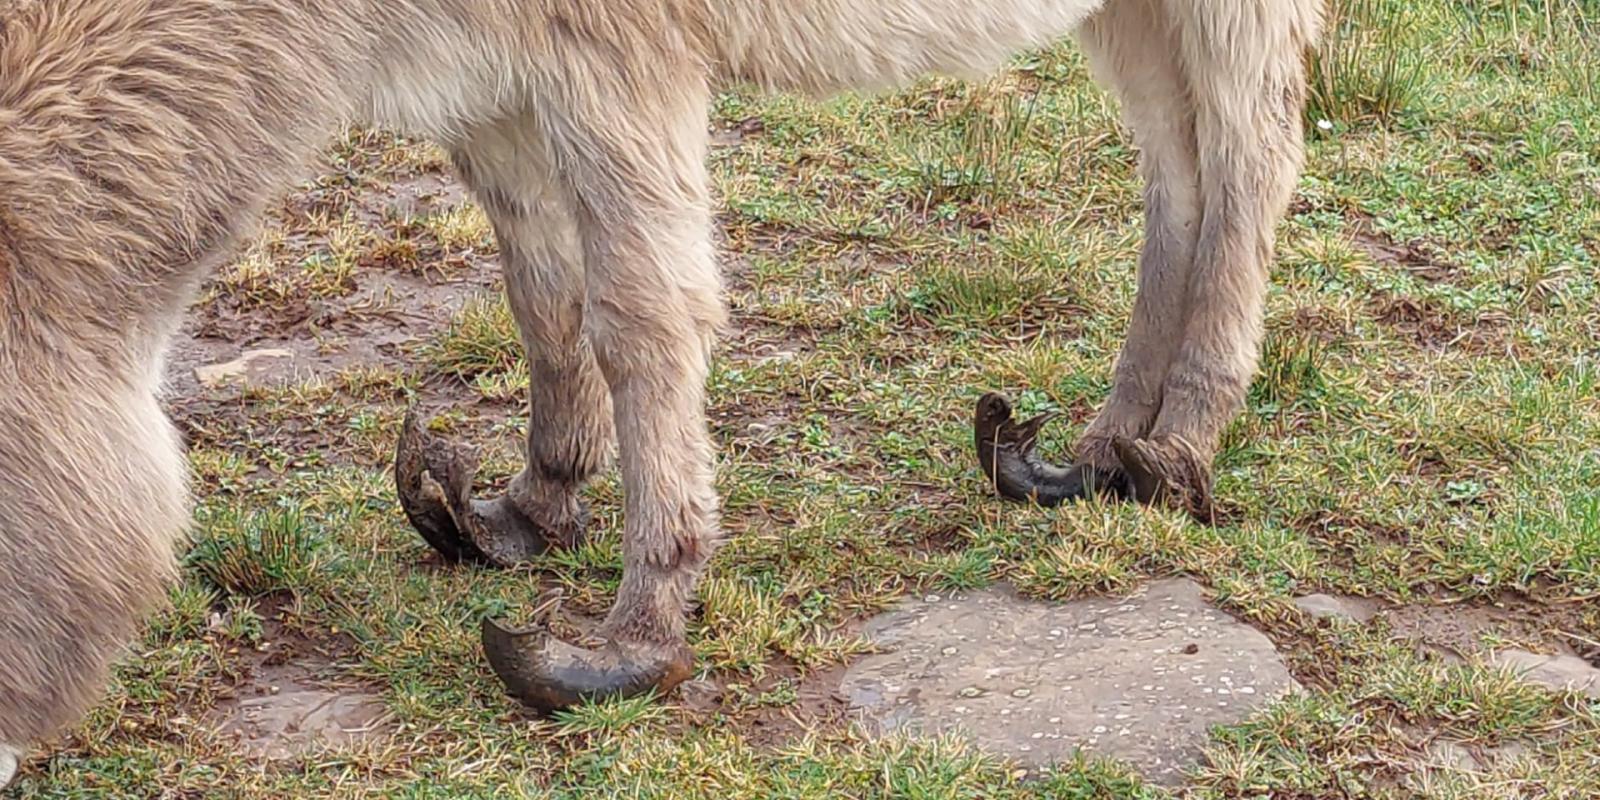 Donkey with long and painful hooves